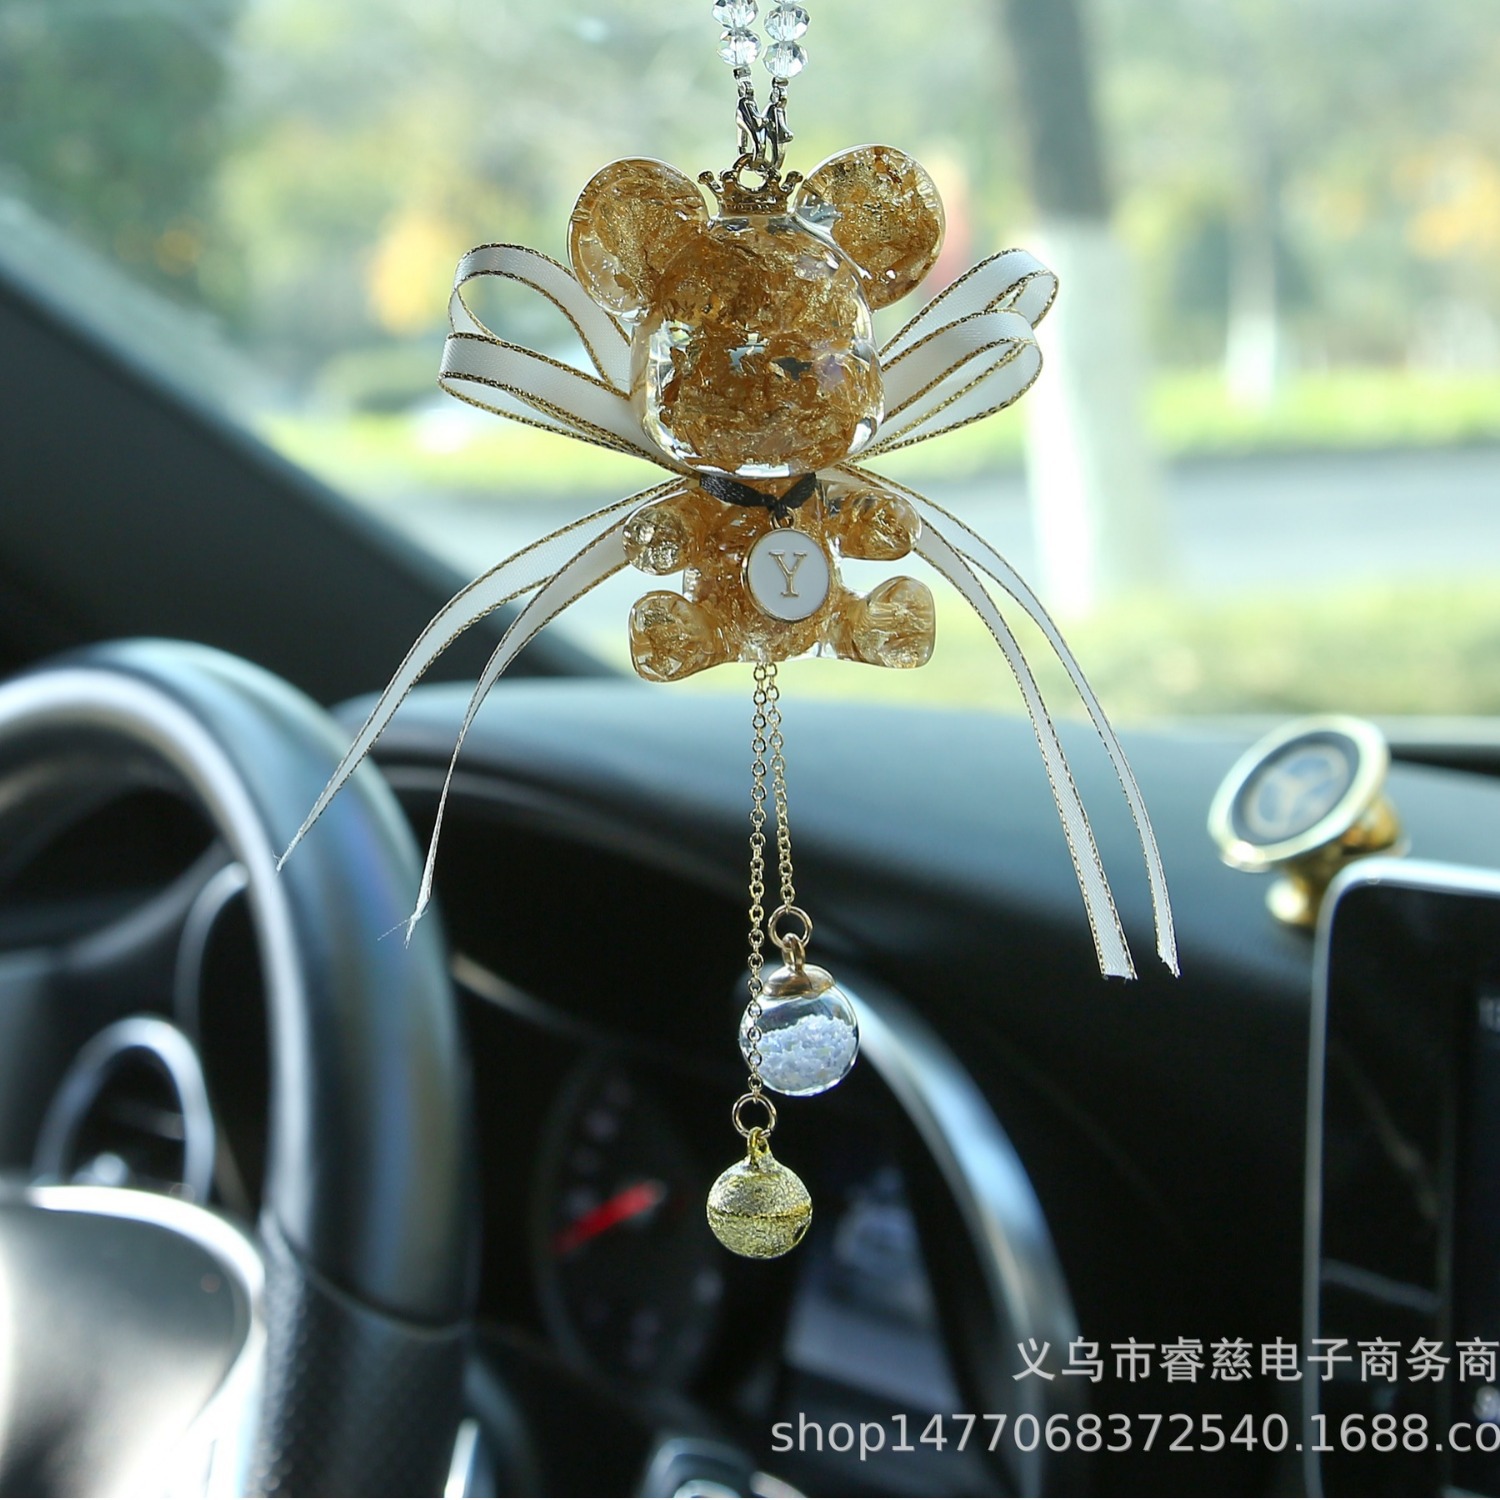 Cute Luxury Car Accessories Crystal Bear Car Jewelry Hang Decorations Rearview Mirror Pendant Car Interior Decoration Female Online Influencer Decoration